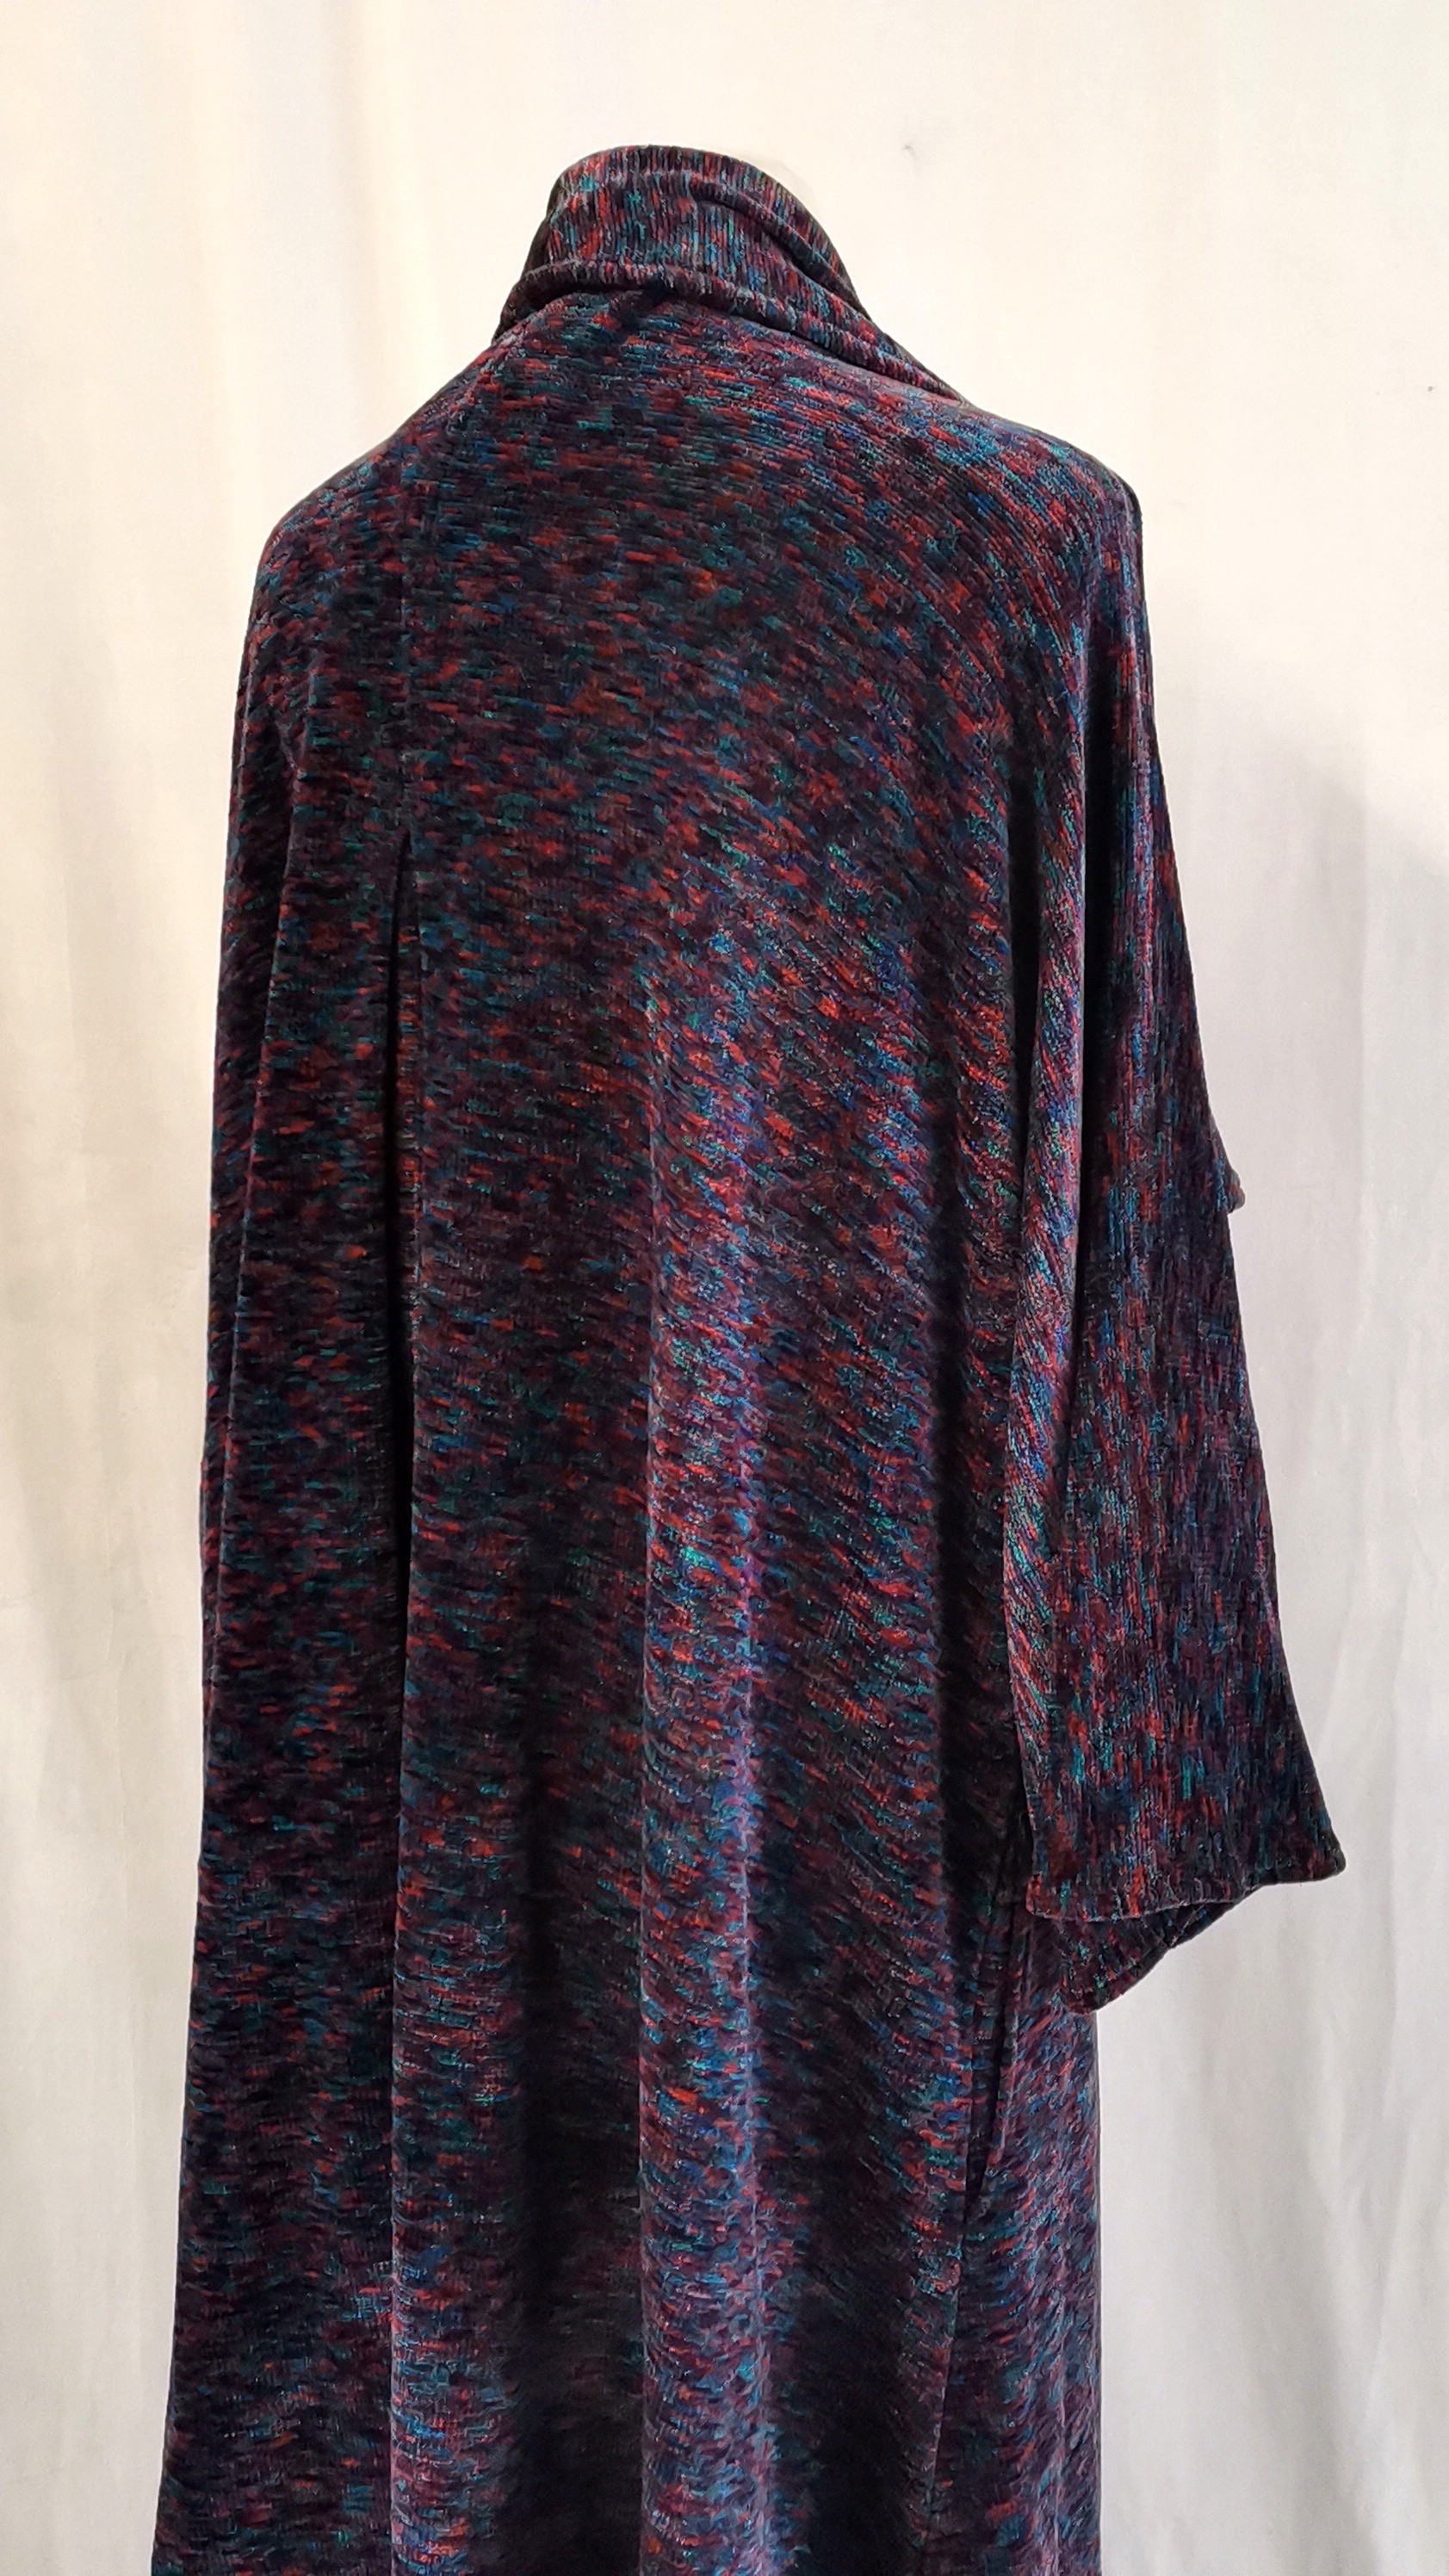 Velvet loose fitting coat large size in multicoloured - good used condition - by Sahara - Image 2 of 3